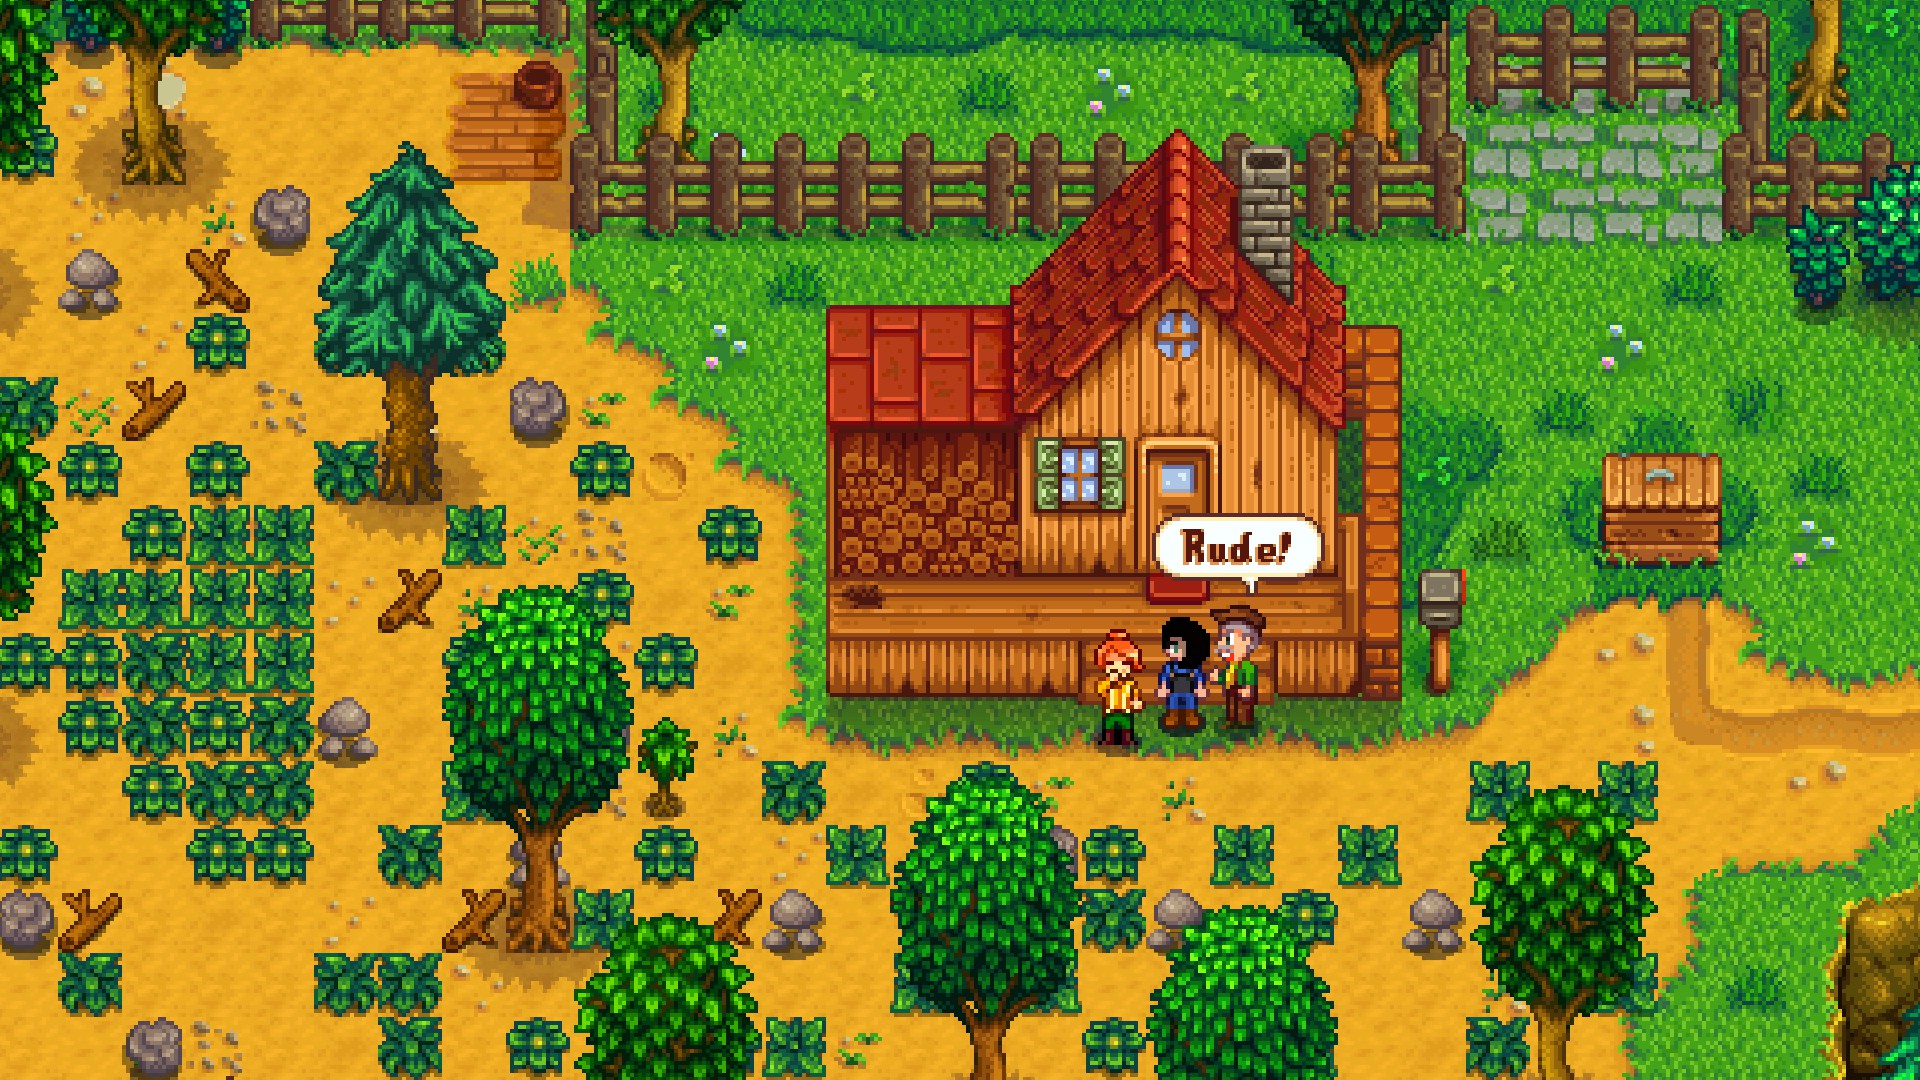 Acclaimed Farming Sim 'Stardew Valley' Coming to iOS